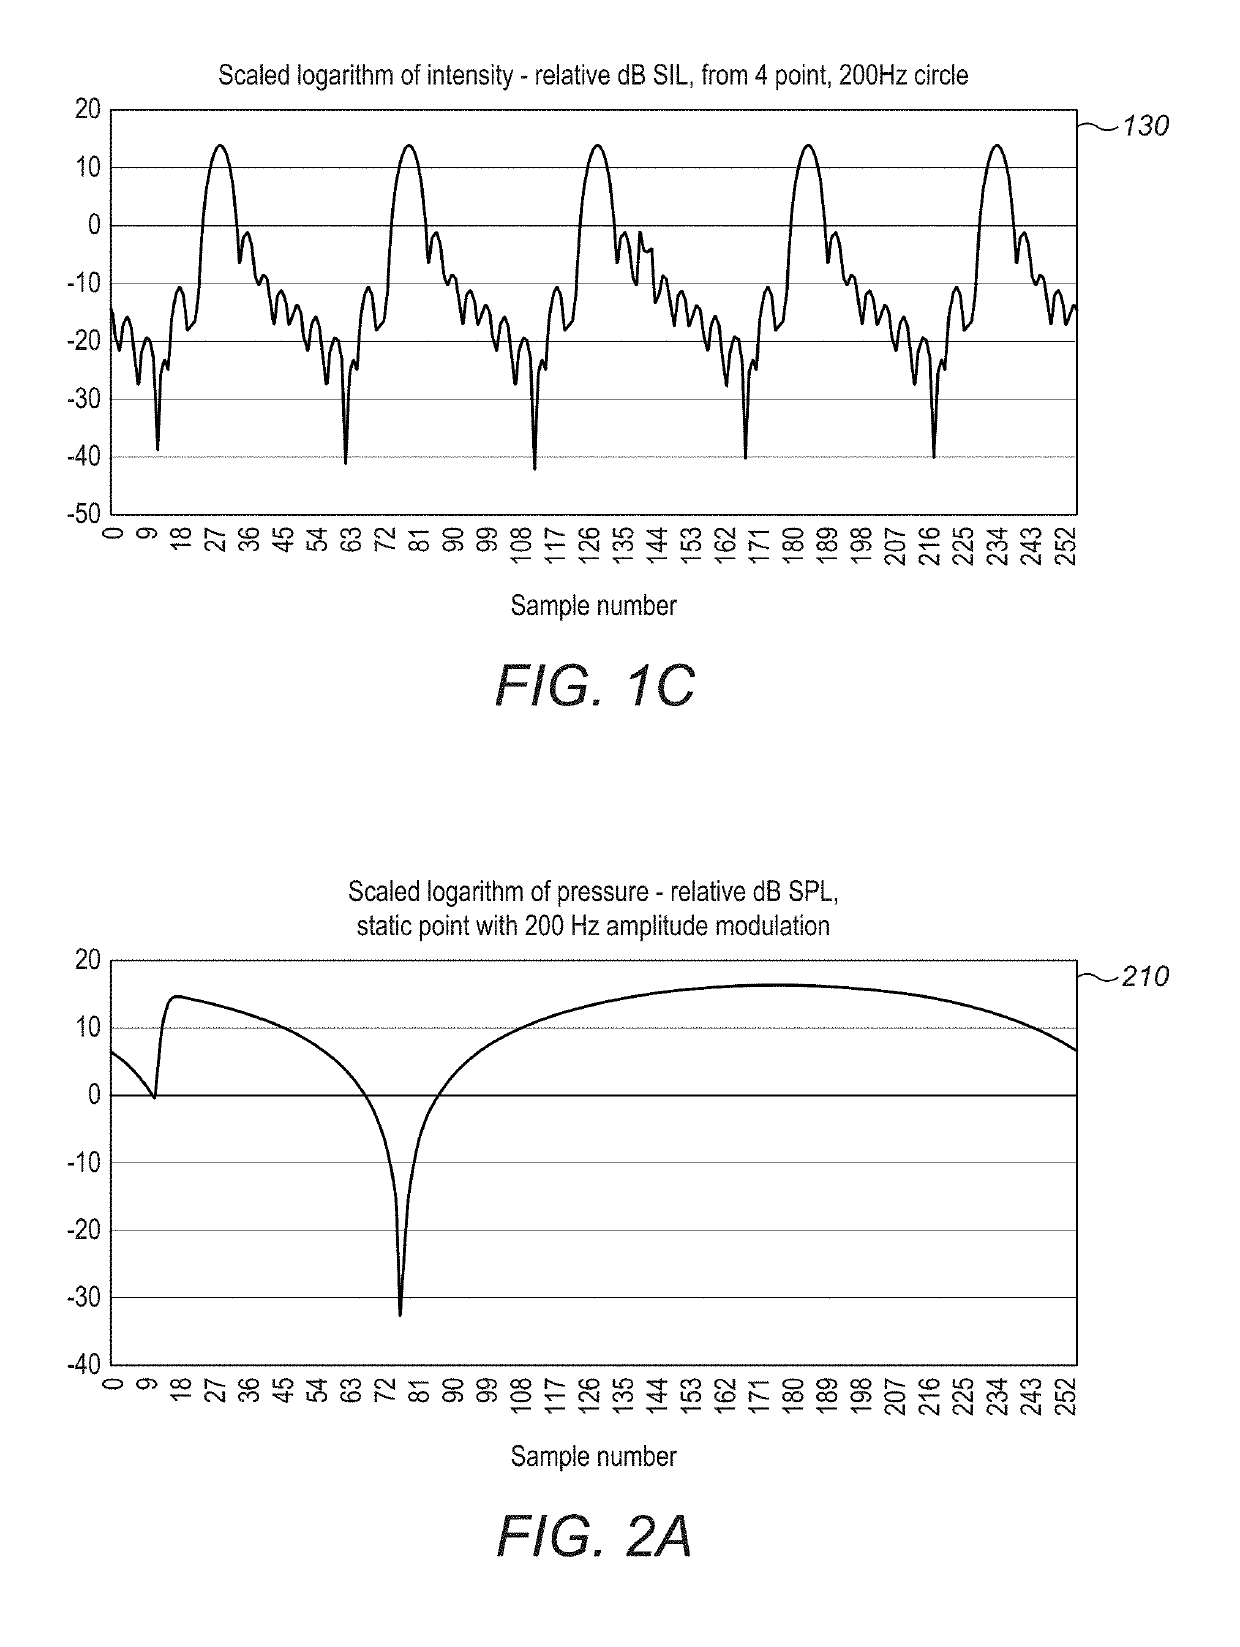 Grouping and Optimization of Phased Ultrasonic Transducers for Multi-Field Solutions